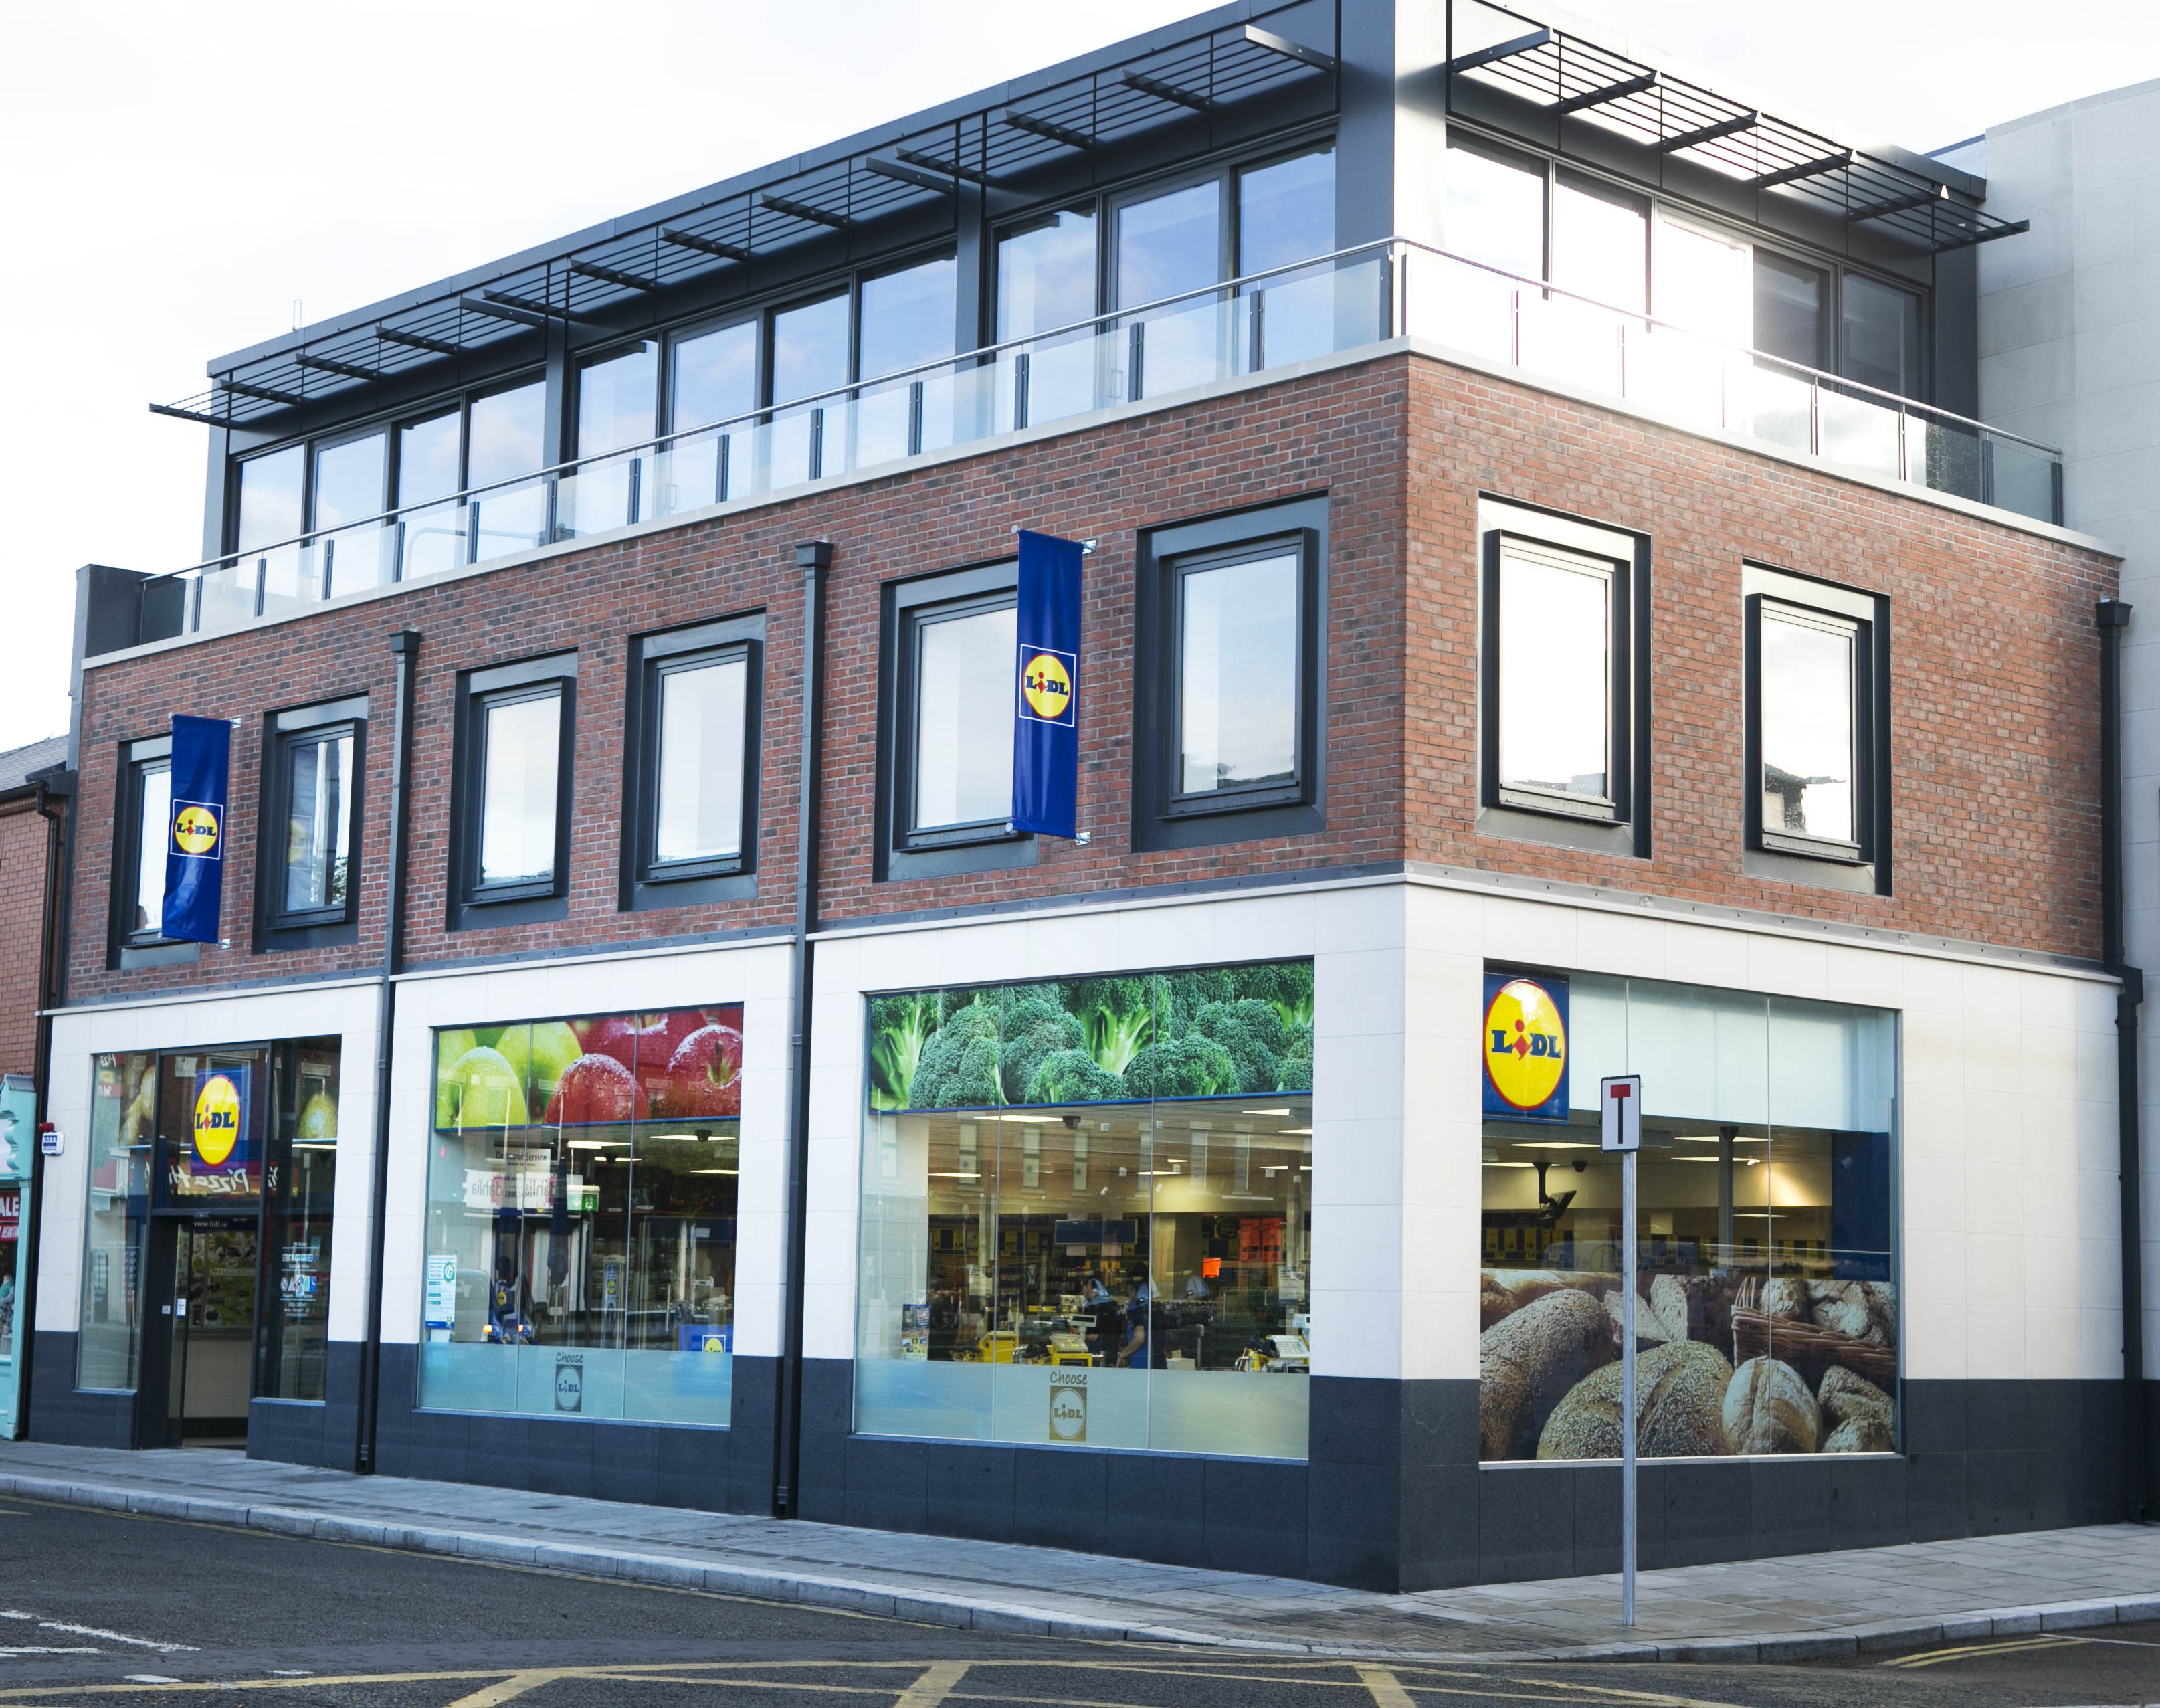 Lidl extended its lead over Aldi in the latest Kantar Worldpanel results